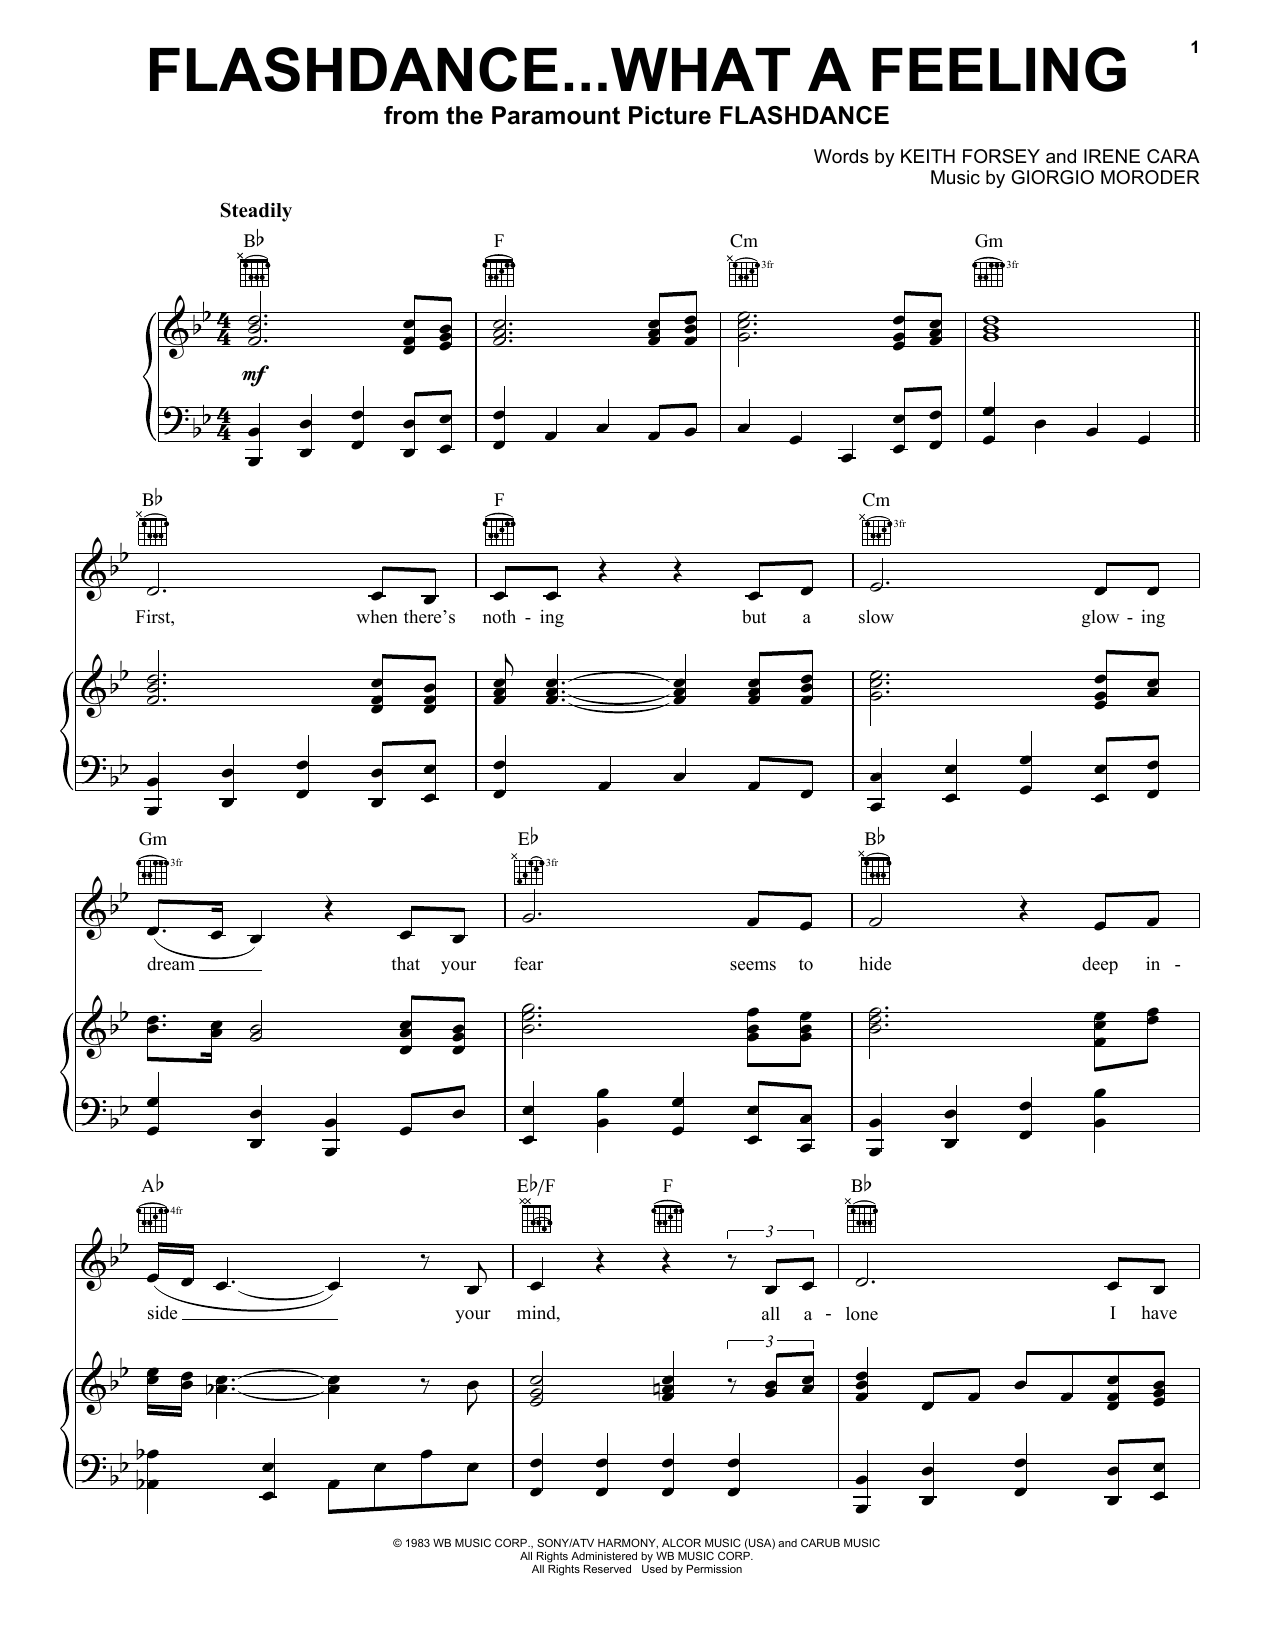 Irene Cara "Flashdance...What A Feeling" Sheet Music Notes | Download